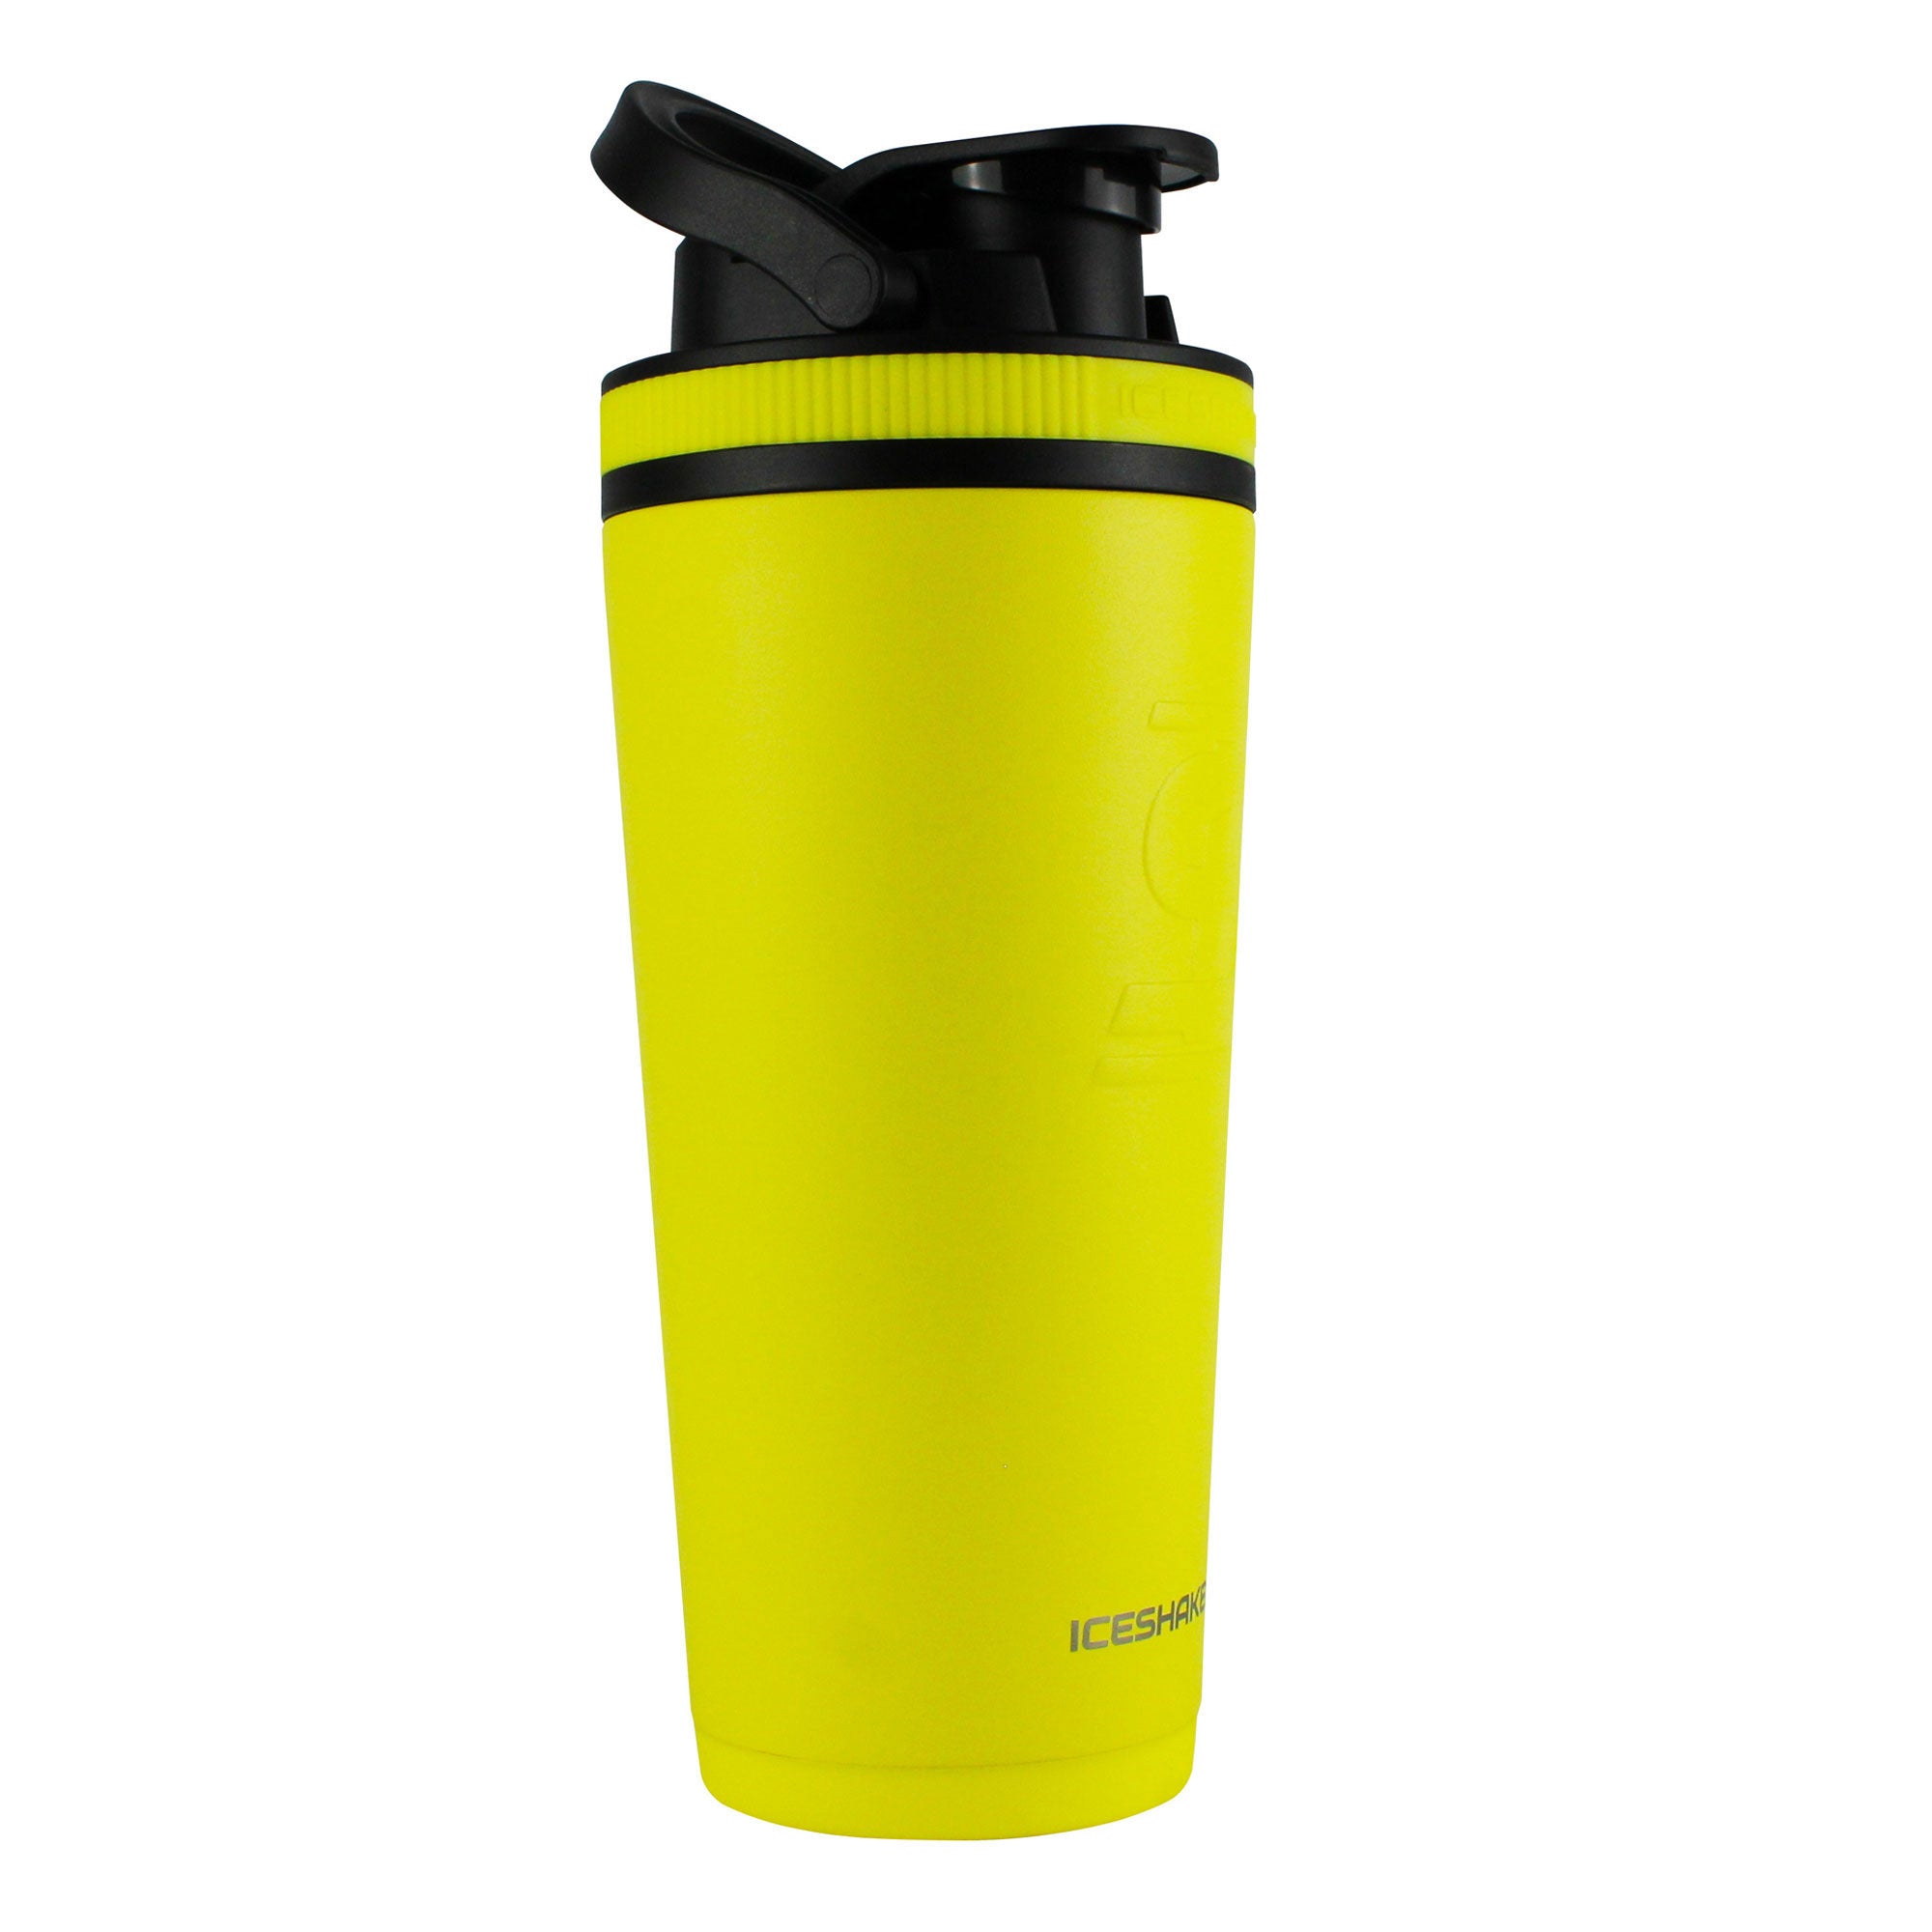 Officially Licensed University of Iowa 26oz Ice Shaker - Yellow